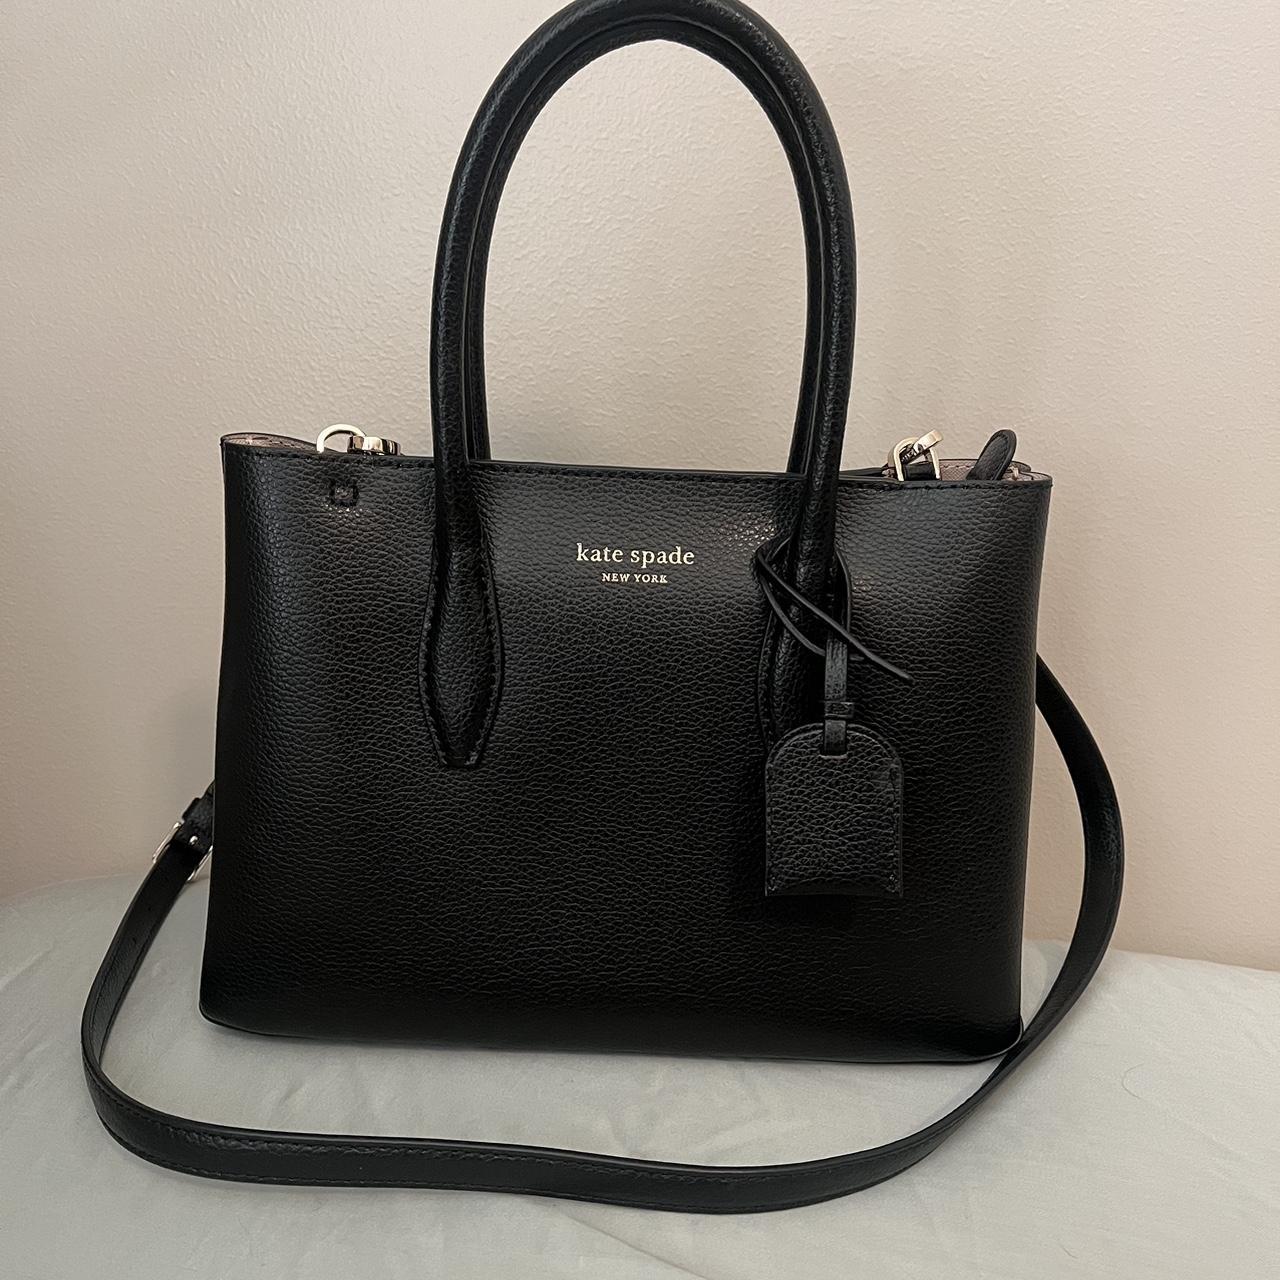 New and used Kate Spade Handbags for sale | Facebook Marketplace | Facebook